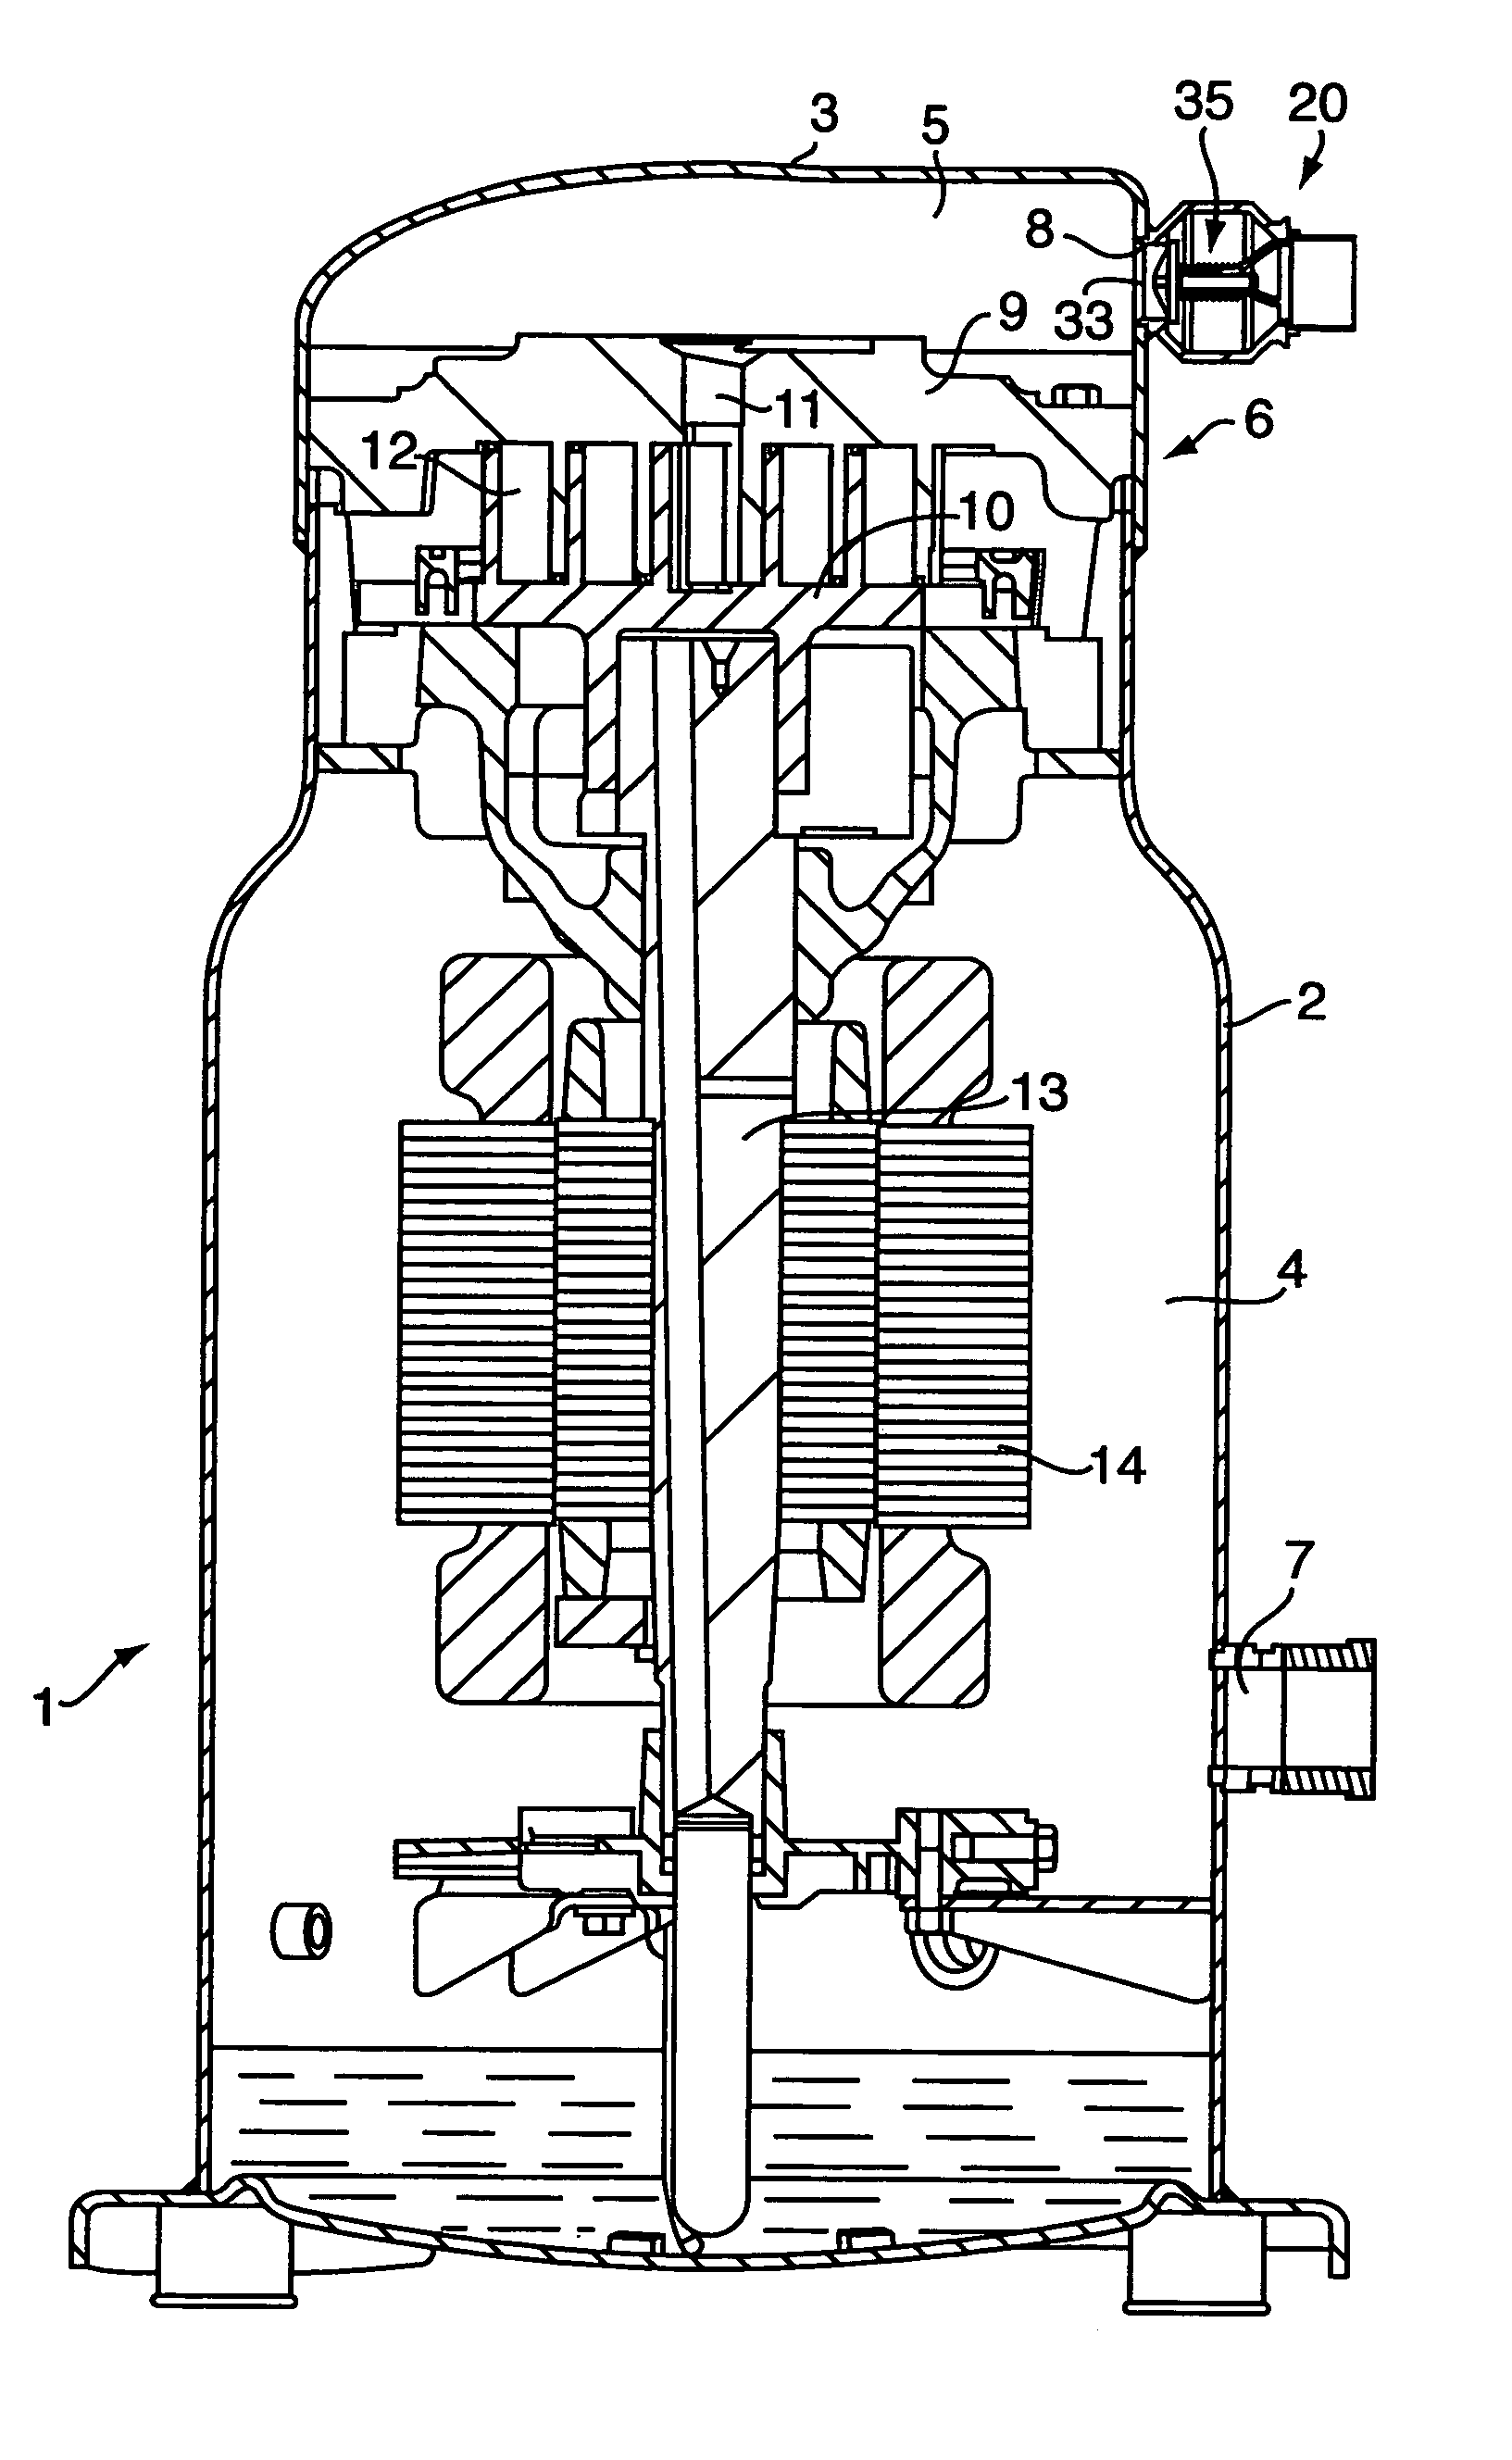 Discharge check valve assembly for use with hermetic scroll compressor